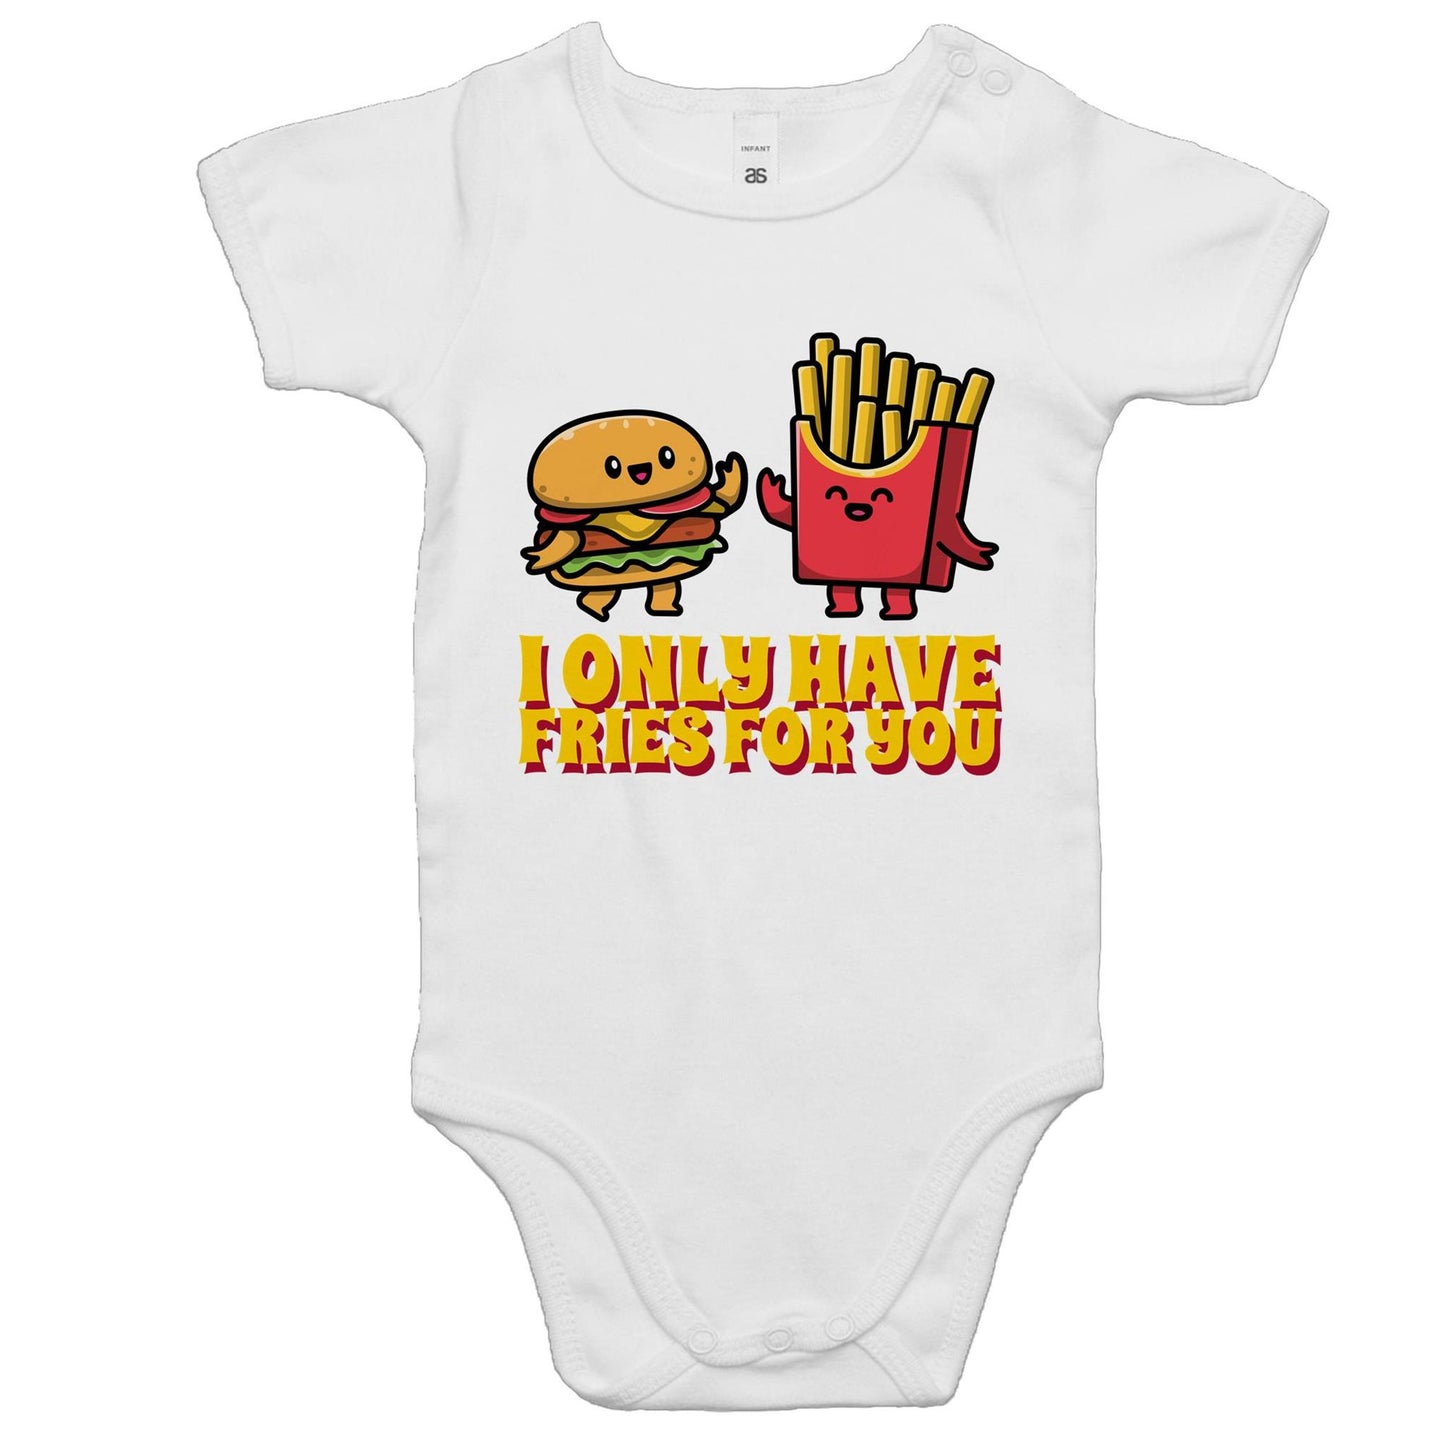 I Only Have Fries For You, Burger And Fries - Baby Bodysuit White Baby Bodysuit